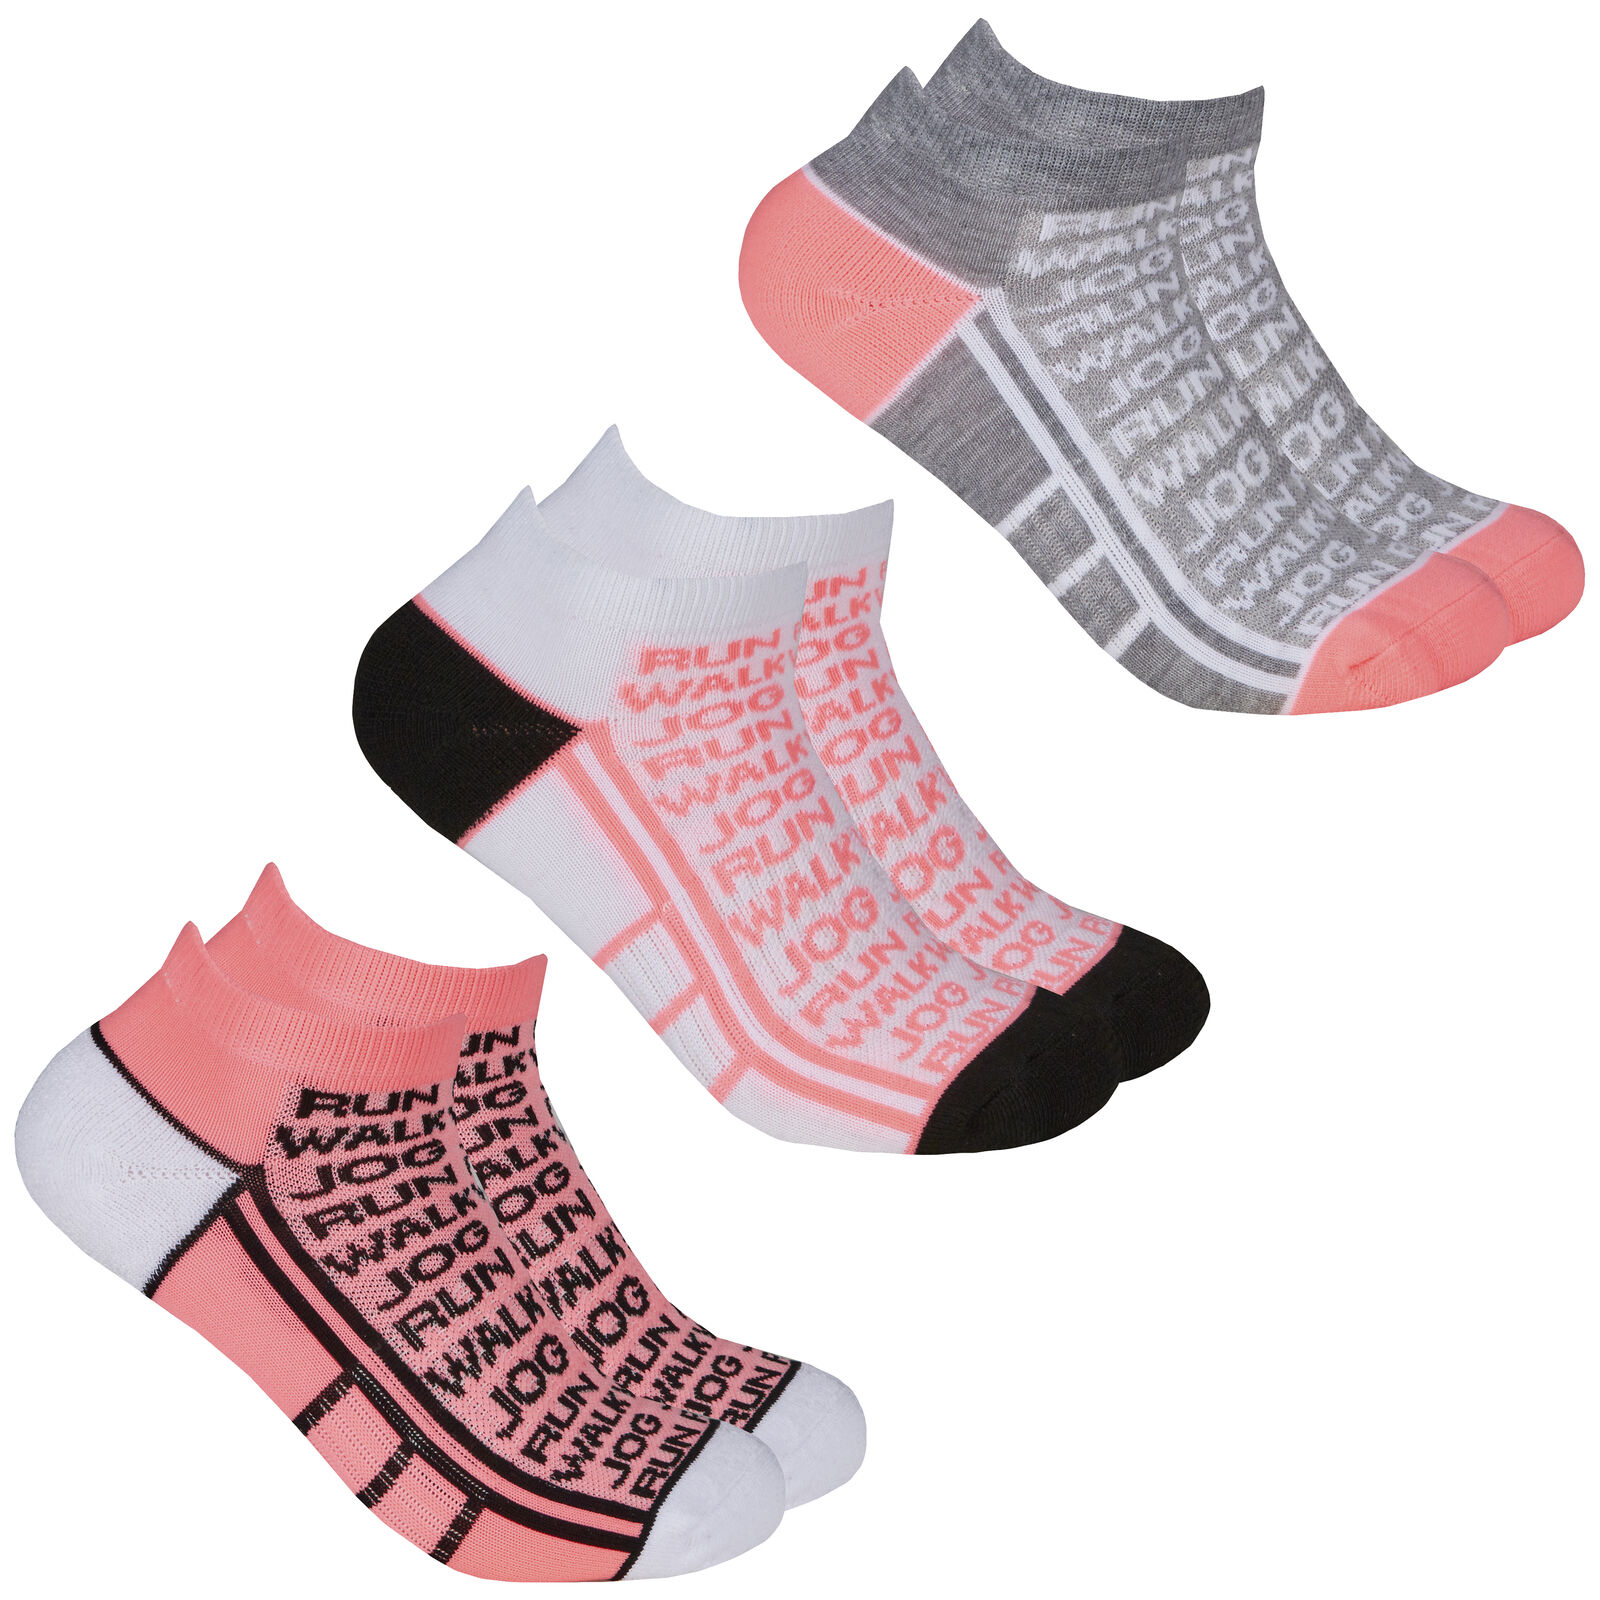 Women's Ladies Ankle Socks Running Trainer Liners Sports Gym 3 Pairs ...